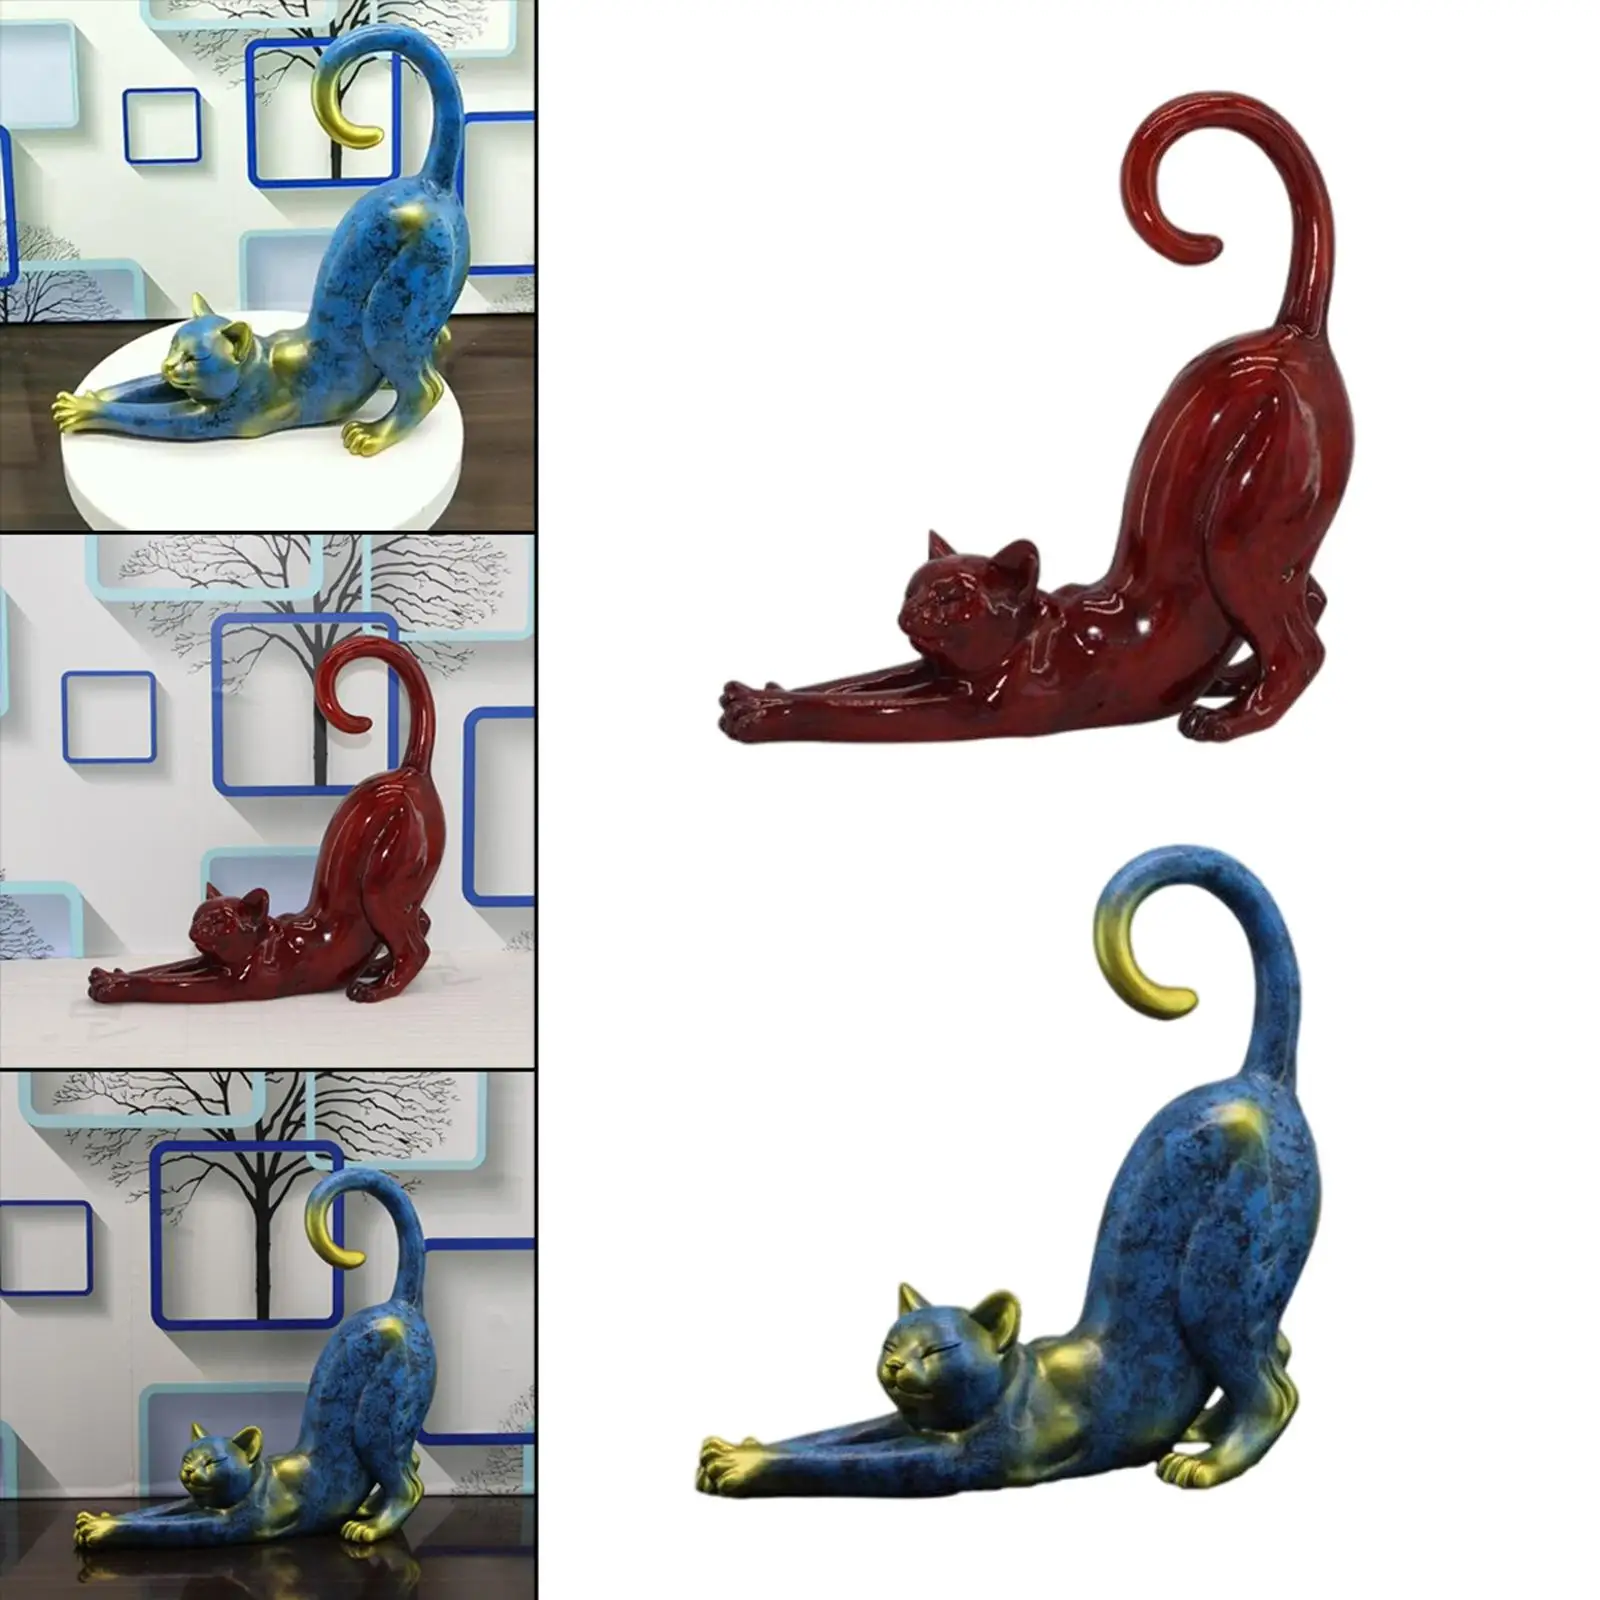 Set of 2 Resin Cat Figurine Simulated Bedroom Office Wedding Decor Gifts